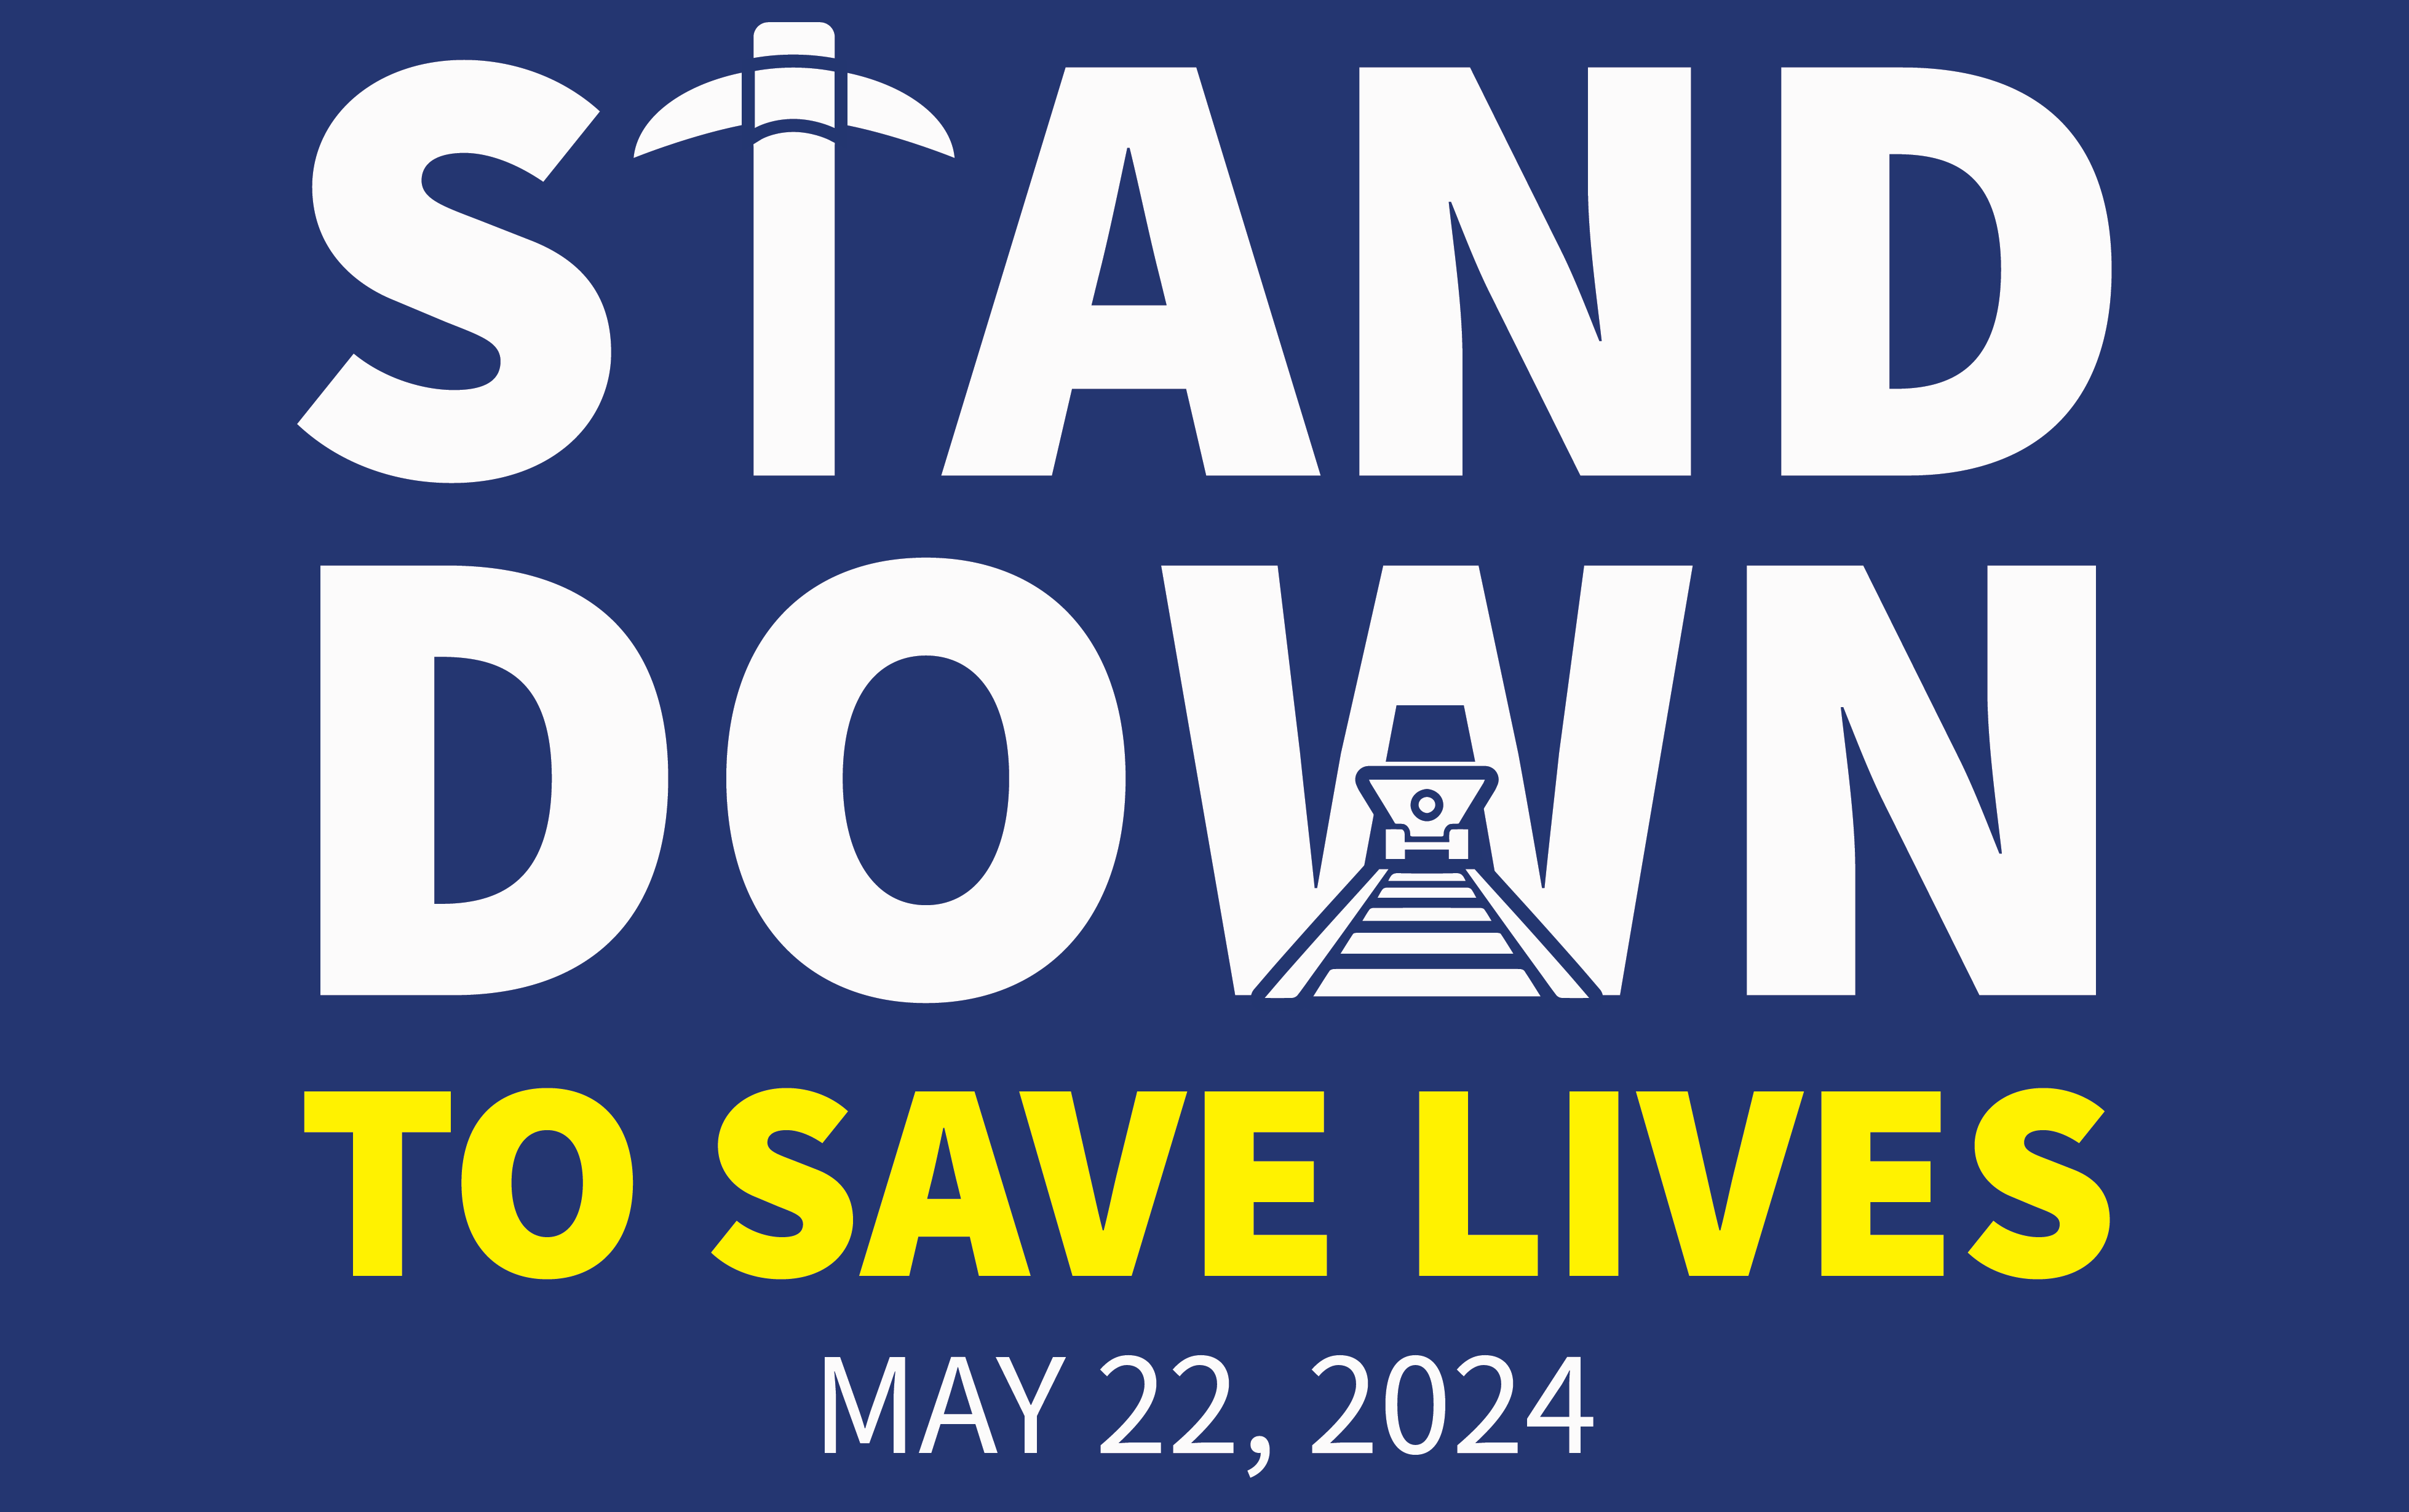 Stand down to save lives